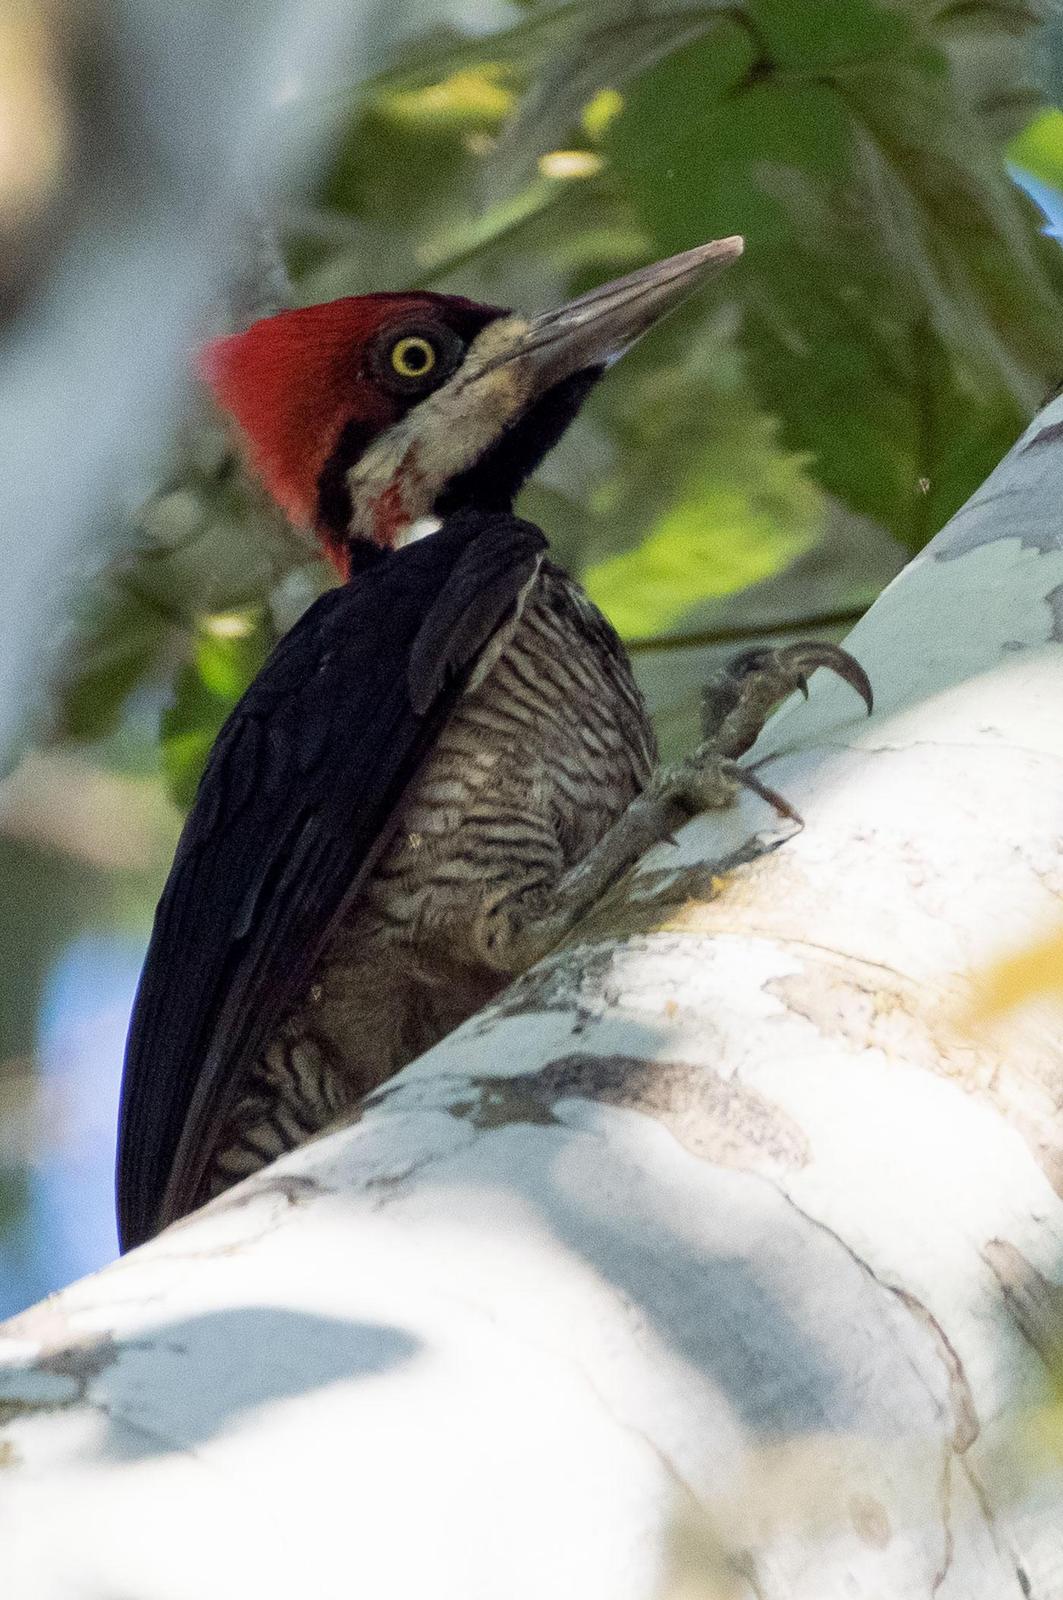 Crimson-crested Woodpecker Photo by Phil Kahler